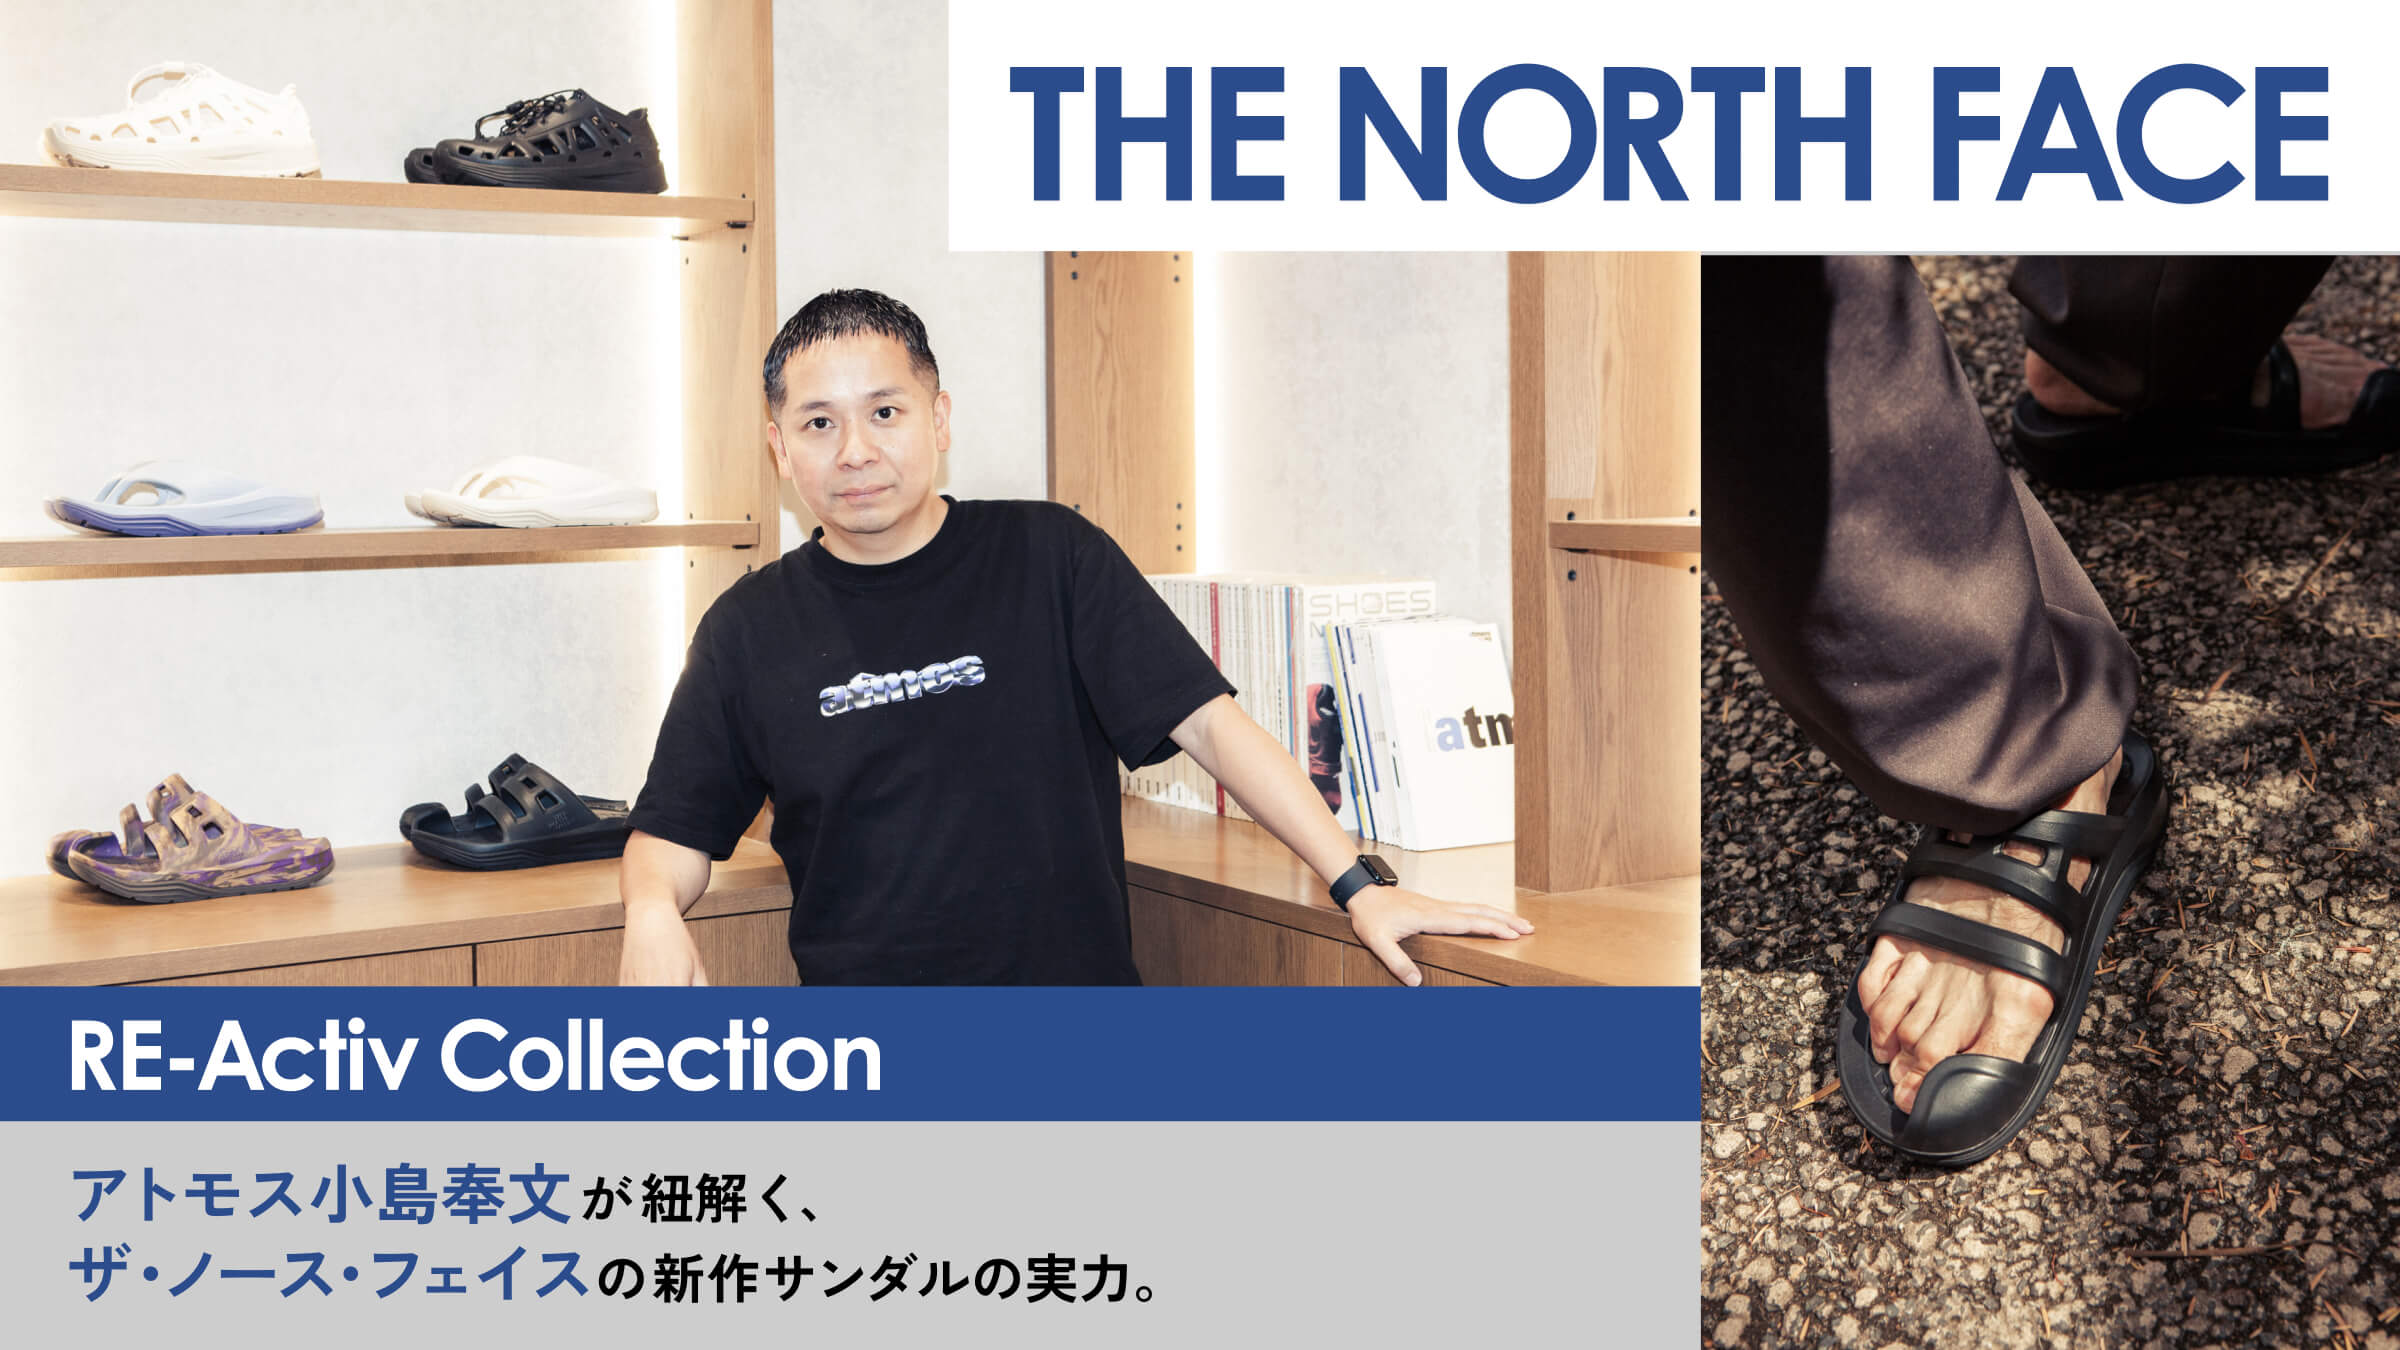 Atmos's Hirofumi Kojima unravels the power of The North Face's new sandals.